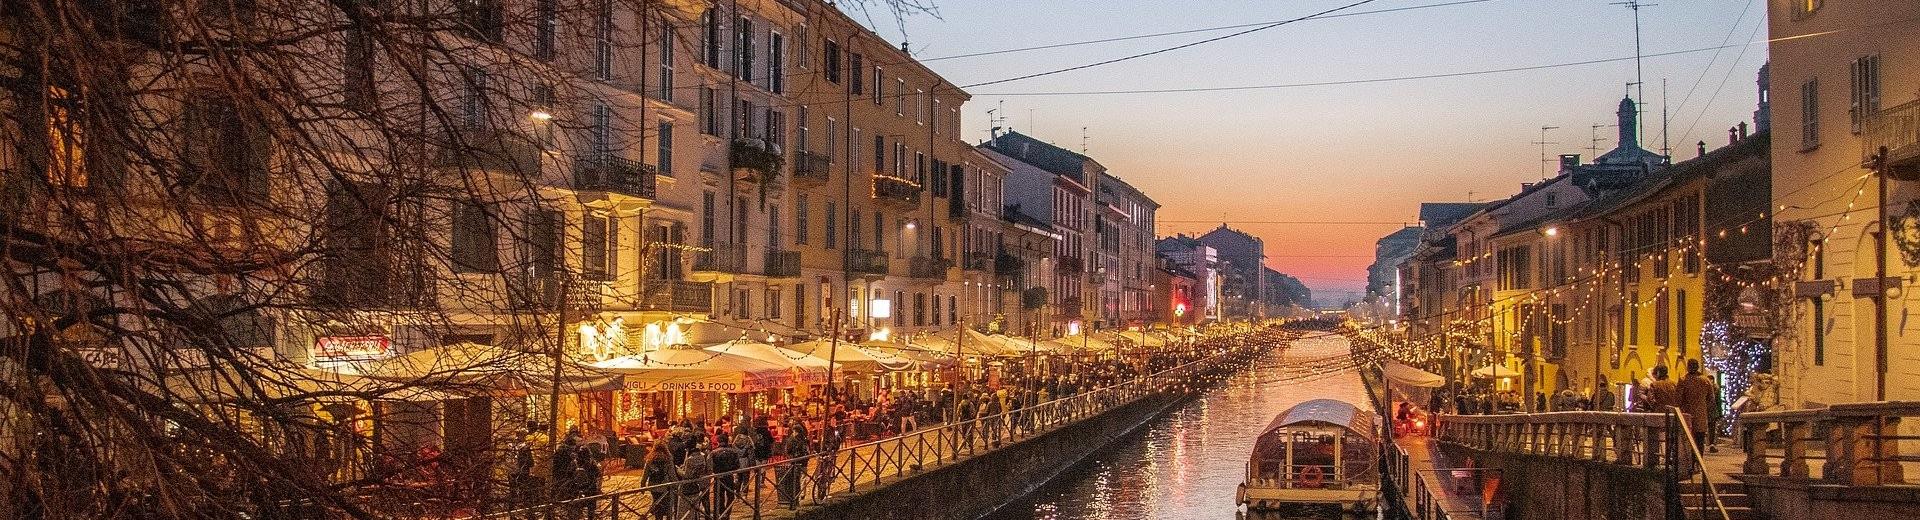 Stay at the Hotel City and discover the Navigli area of Milan with its navigable canals, bars, clubs and shops.